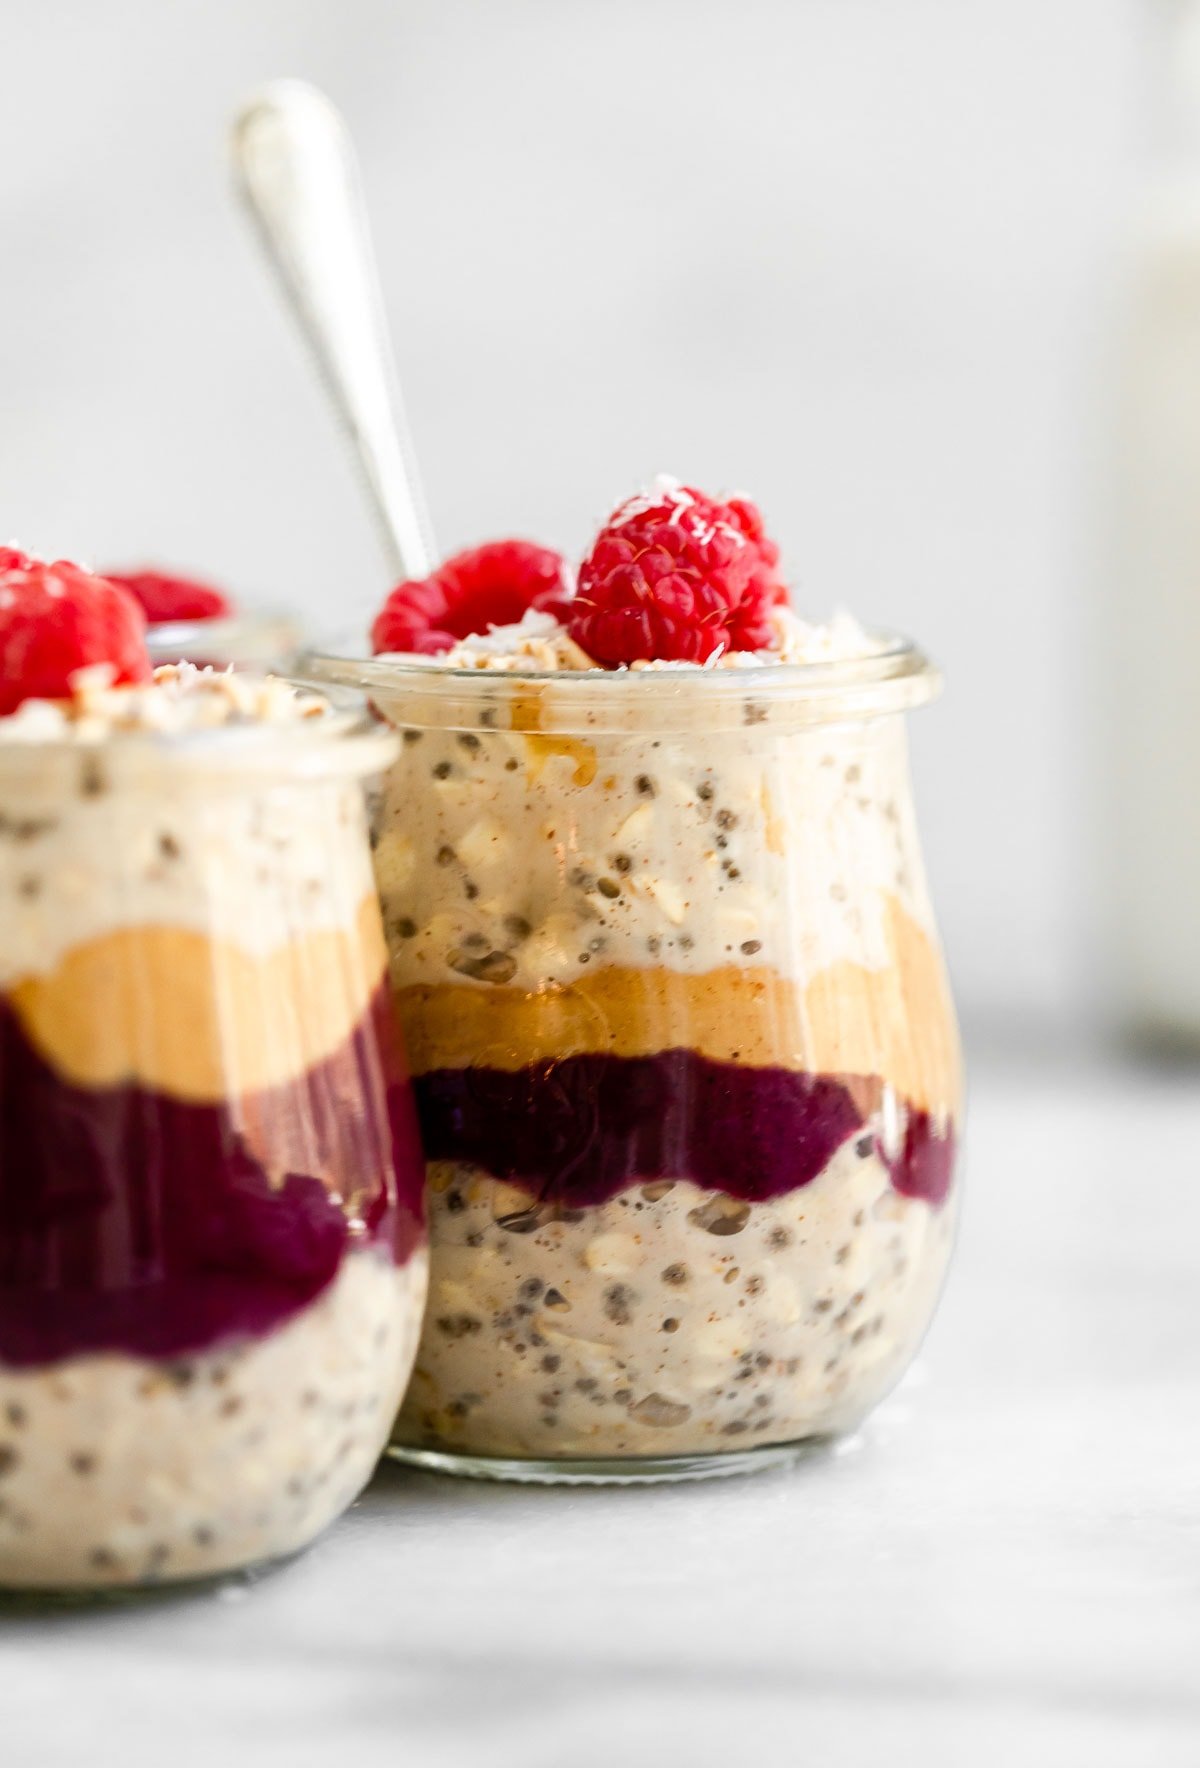 Peanut butter overnight oats with jam and raspberries.